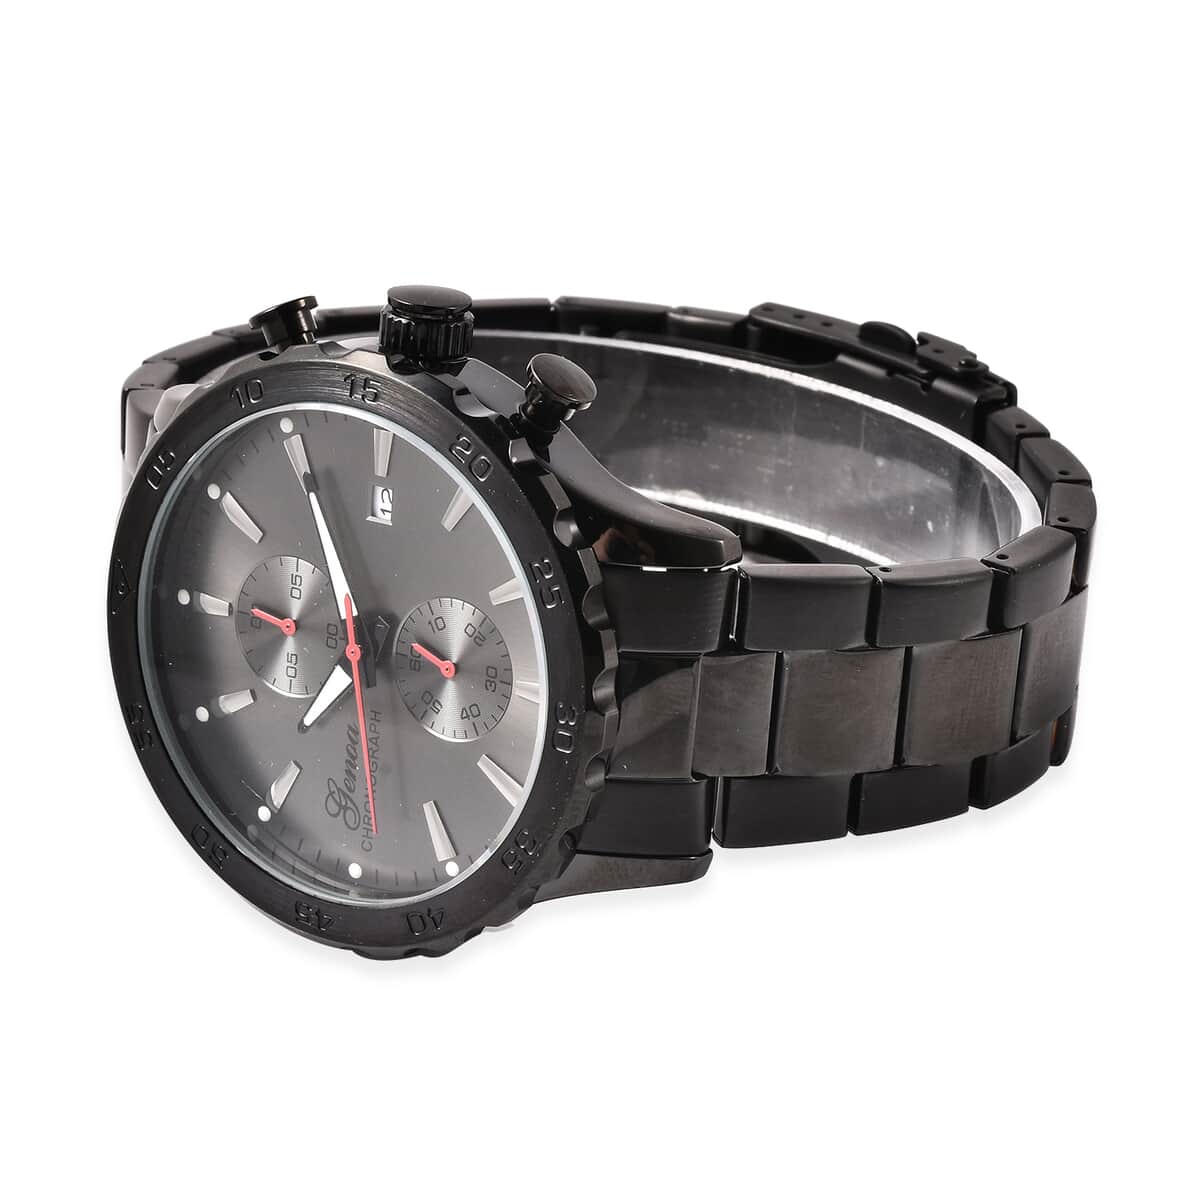 Genoa Multi-function Chronograph Watch with ION Plated Black Stainless Steel Strap & Black Dial (45mm) image number 4